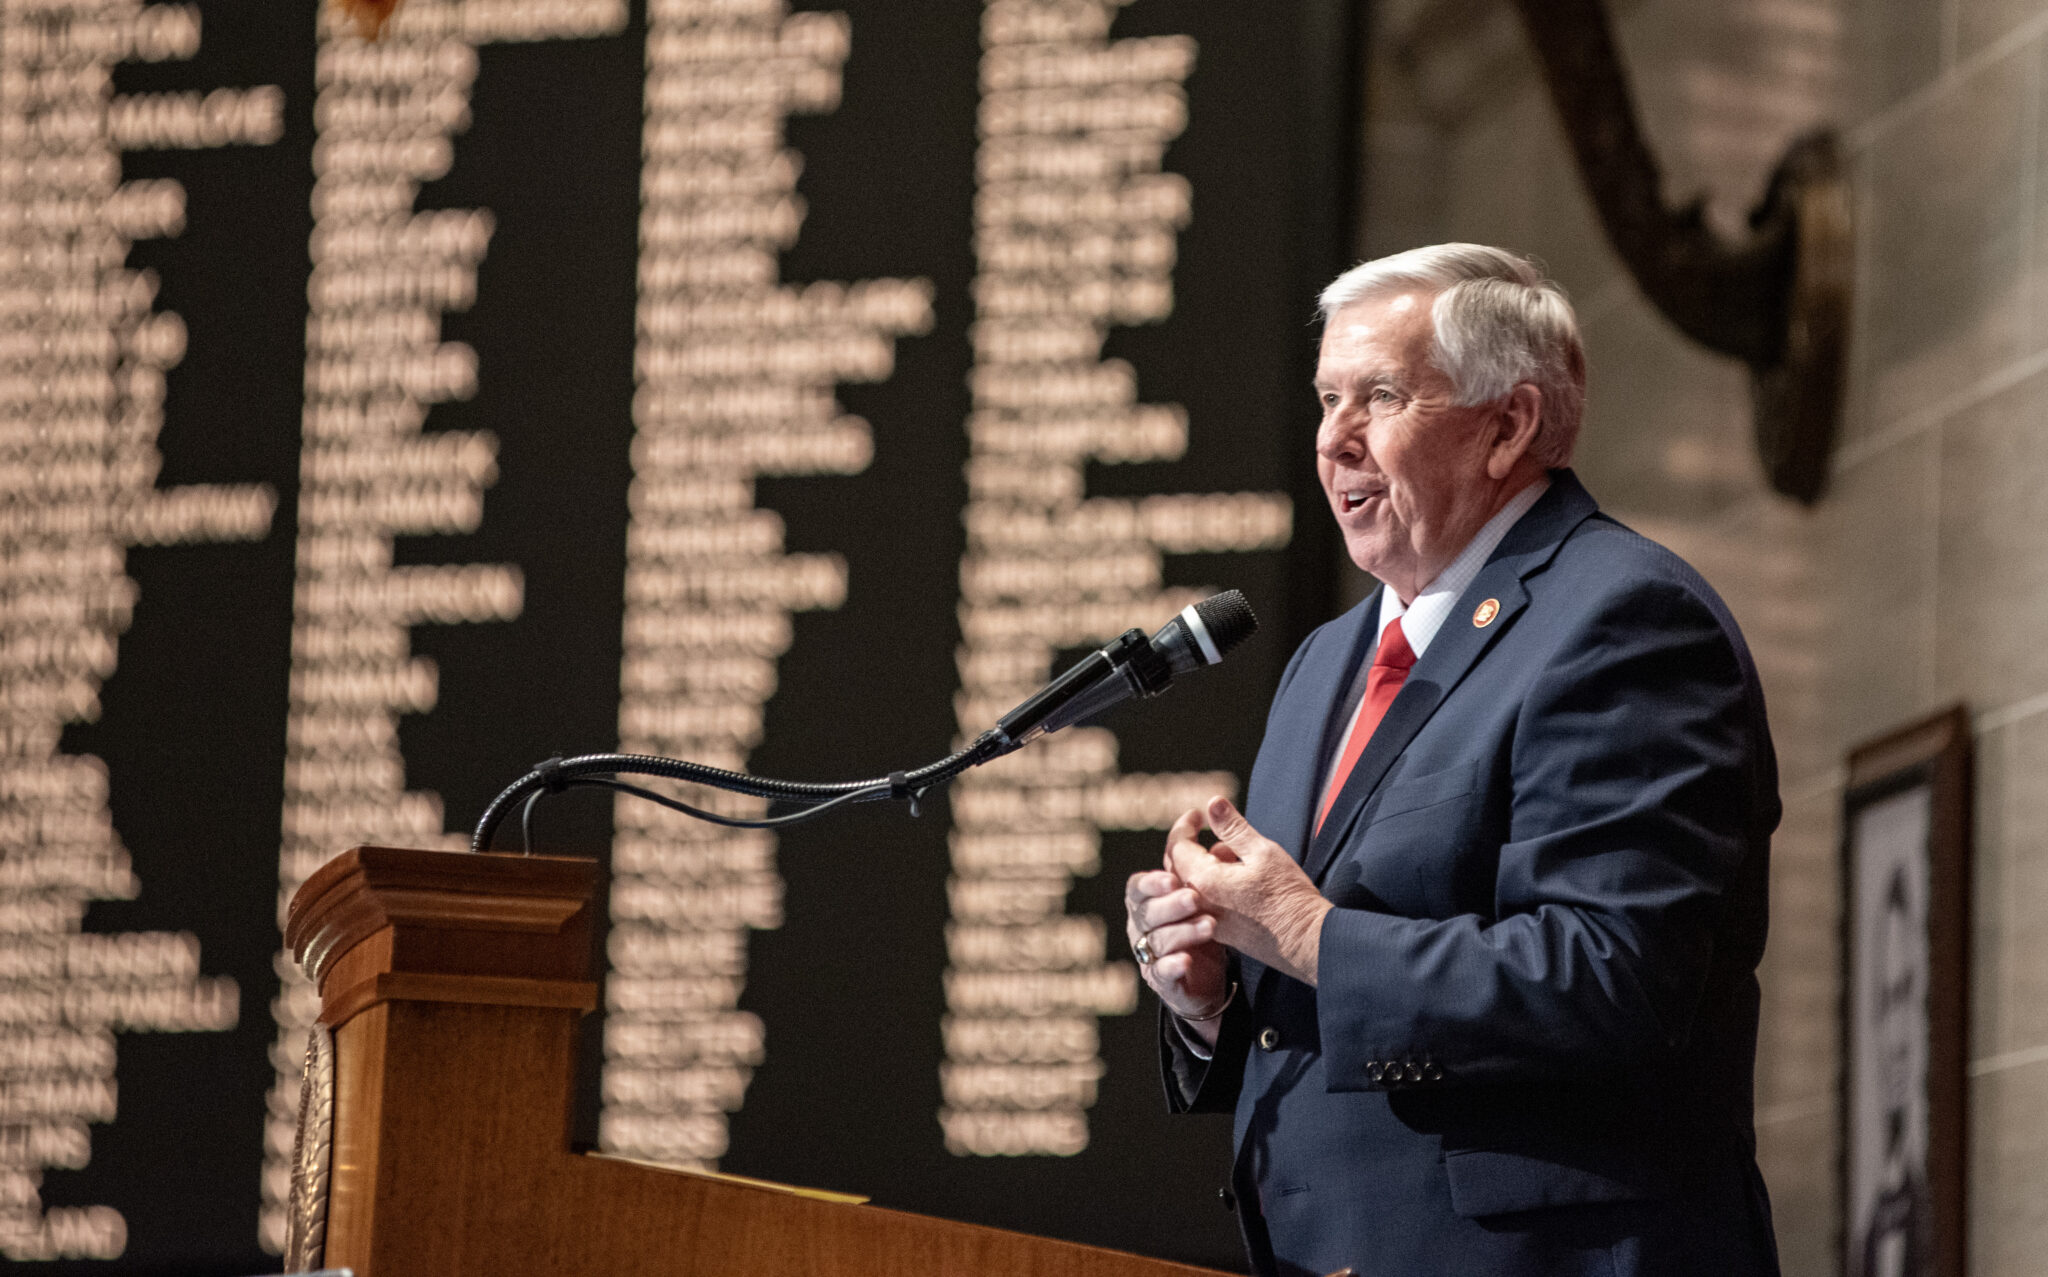 Missouri Gov. Mike Parson begins the annual State of the State speech on the House floor Wednesday (Annelise Hanshaw/Missouri Independent).